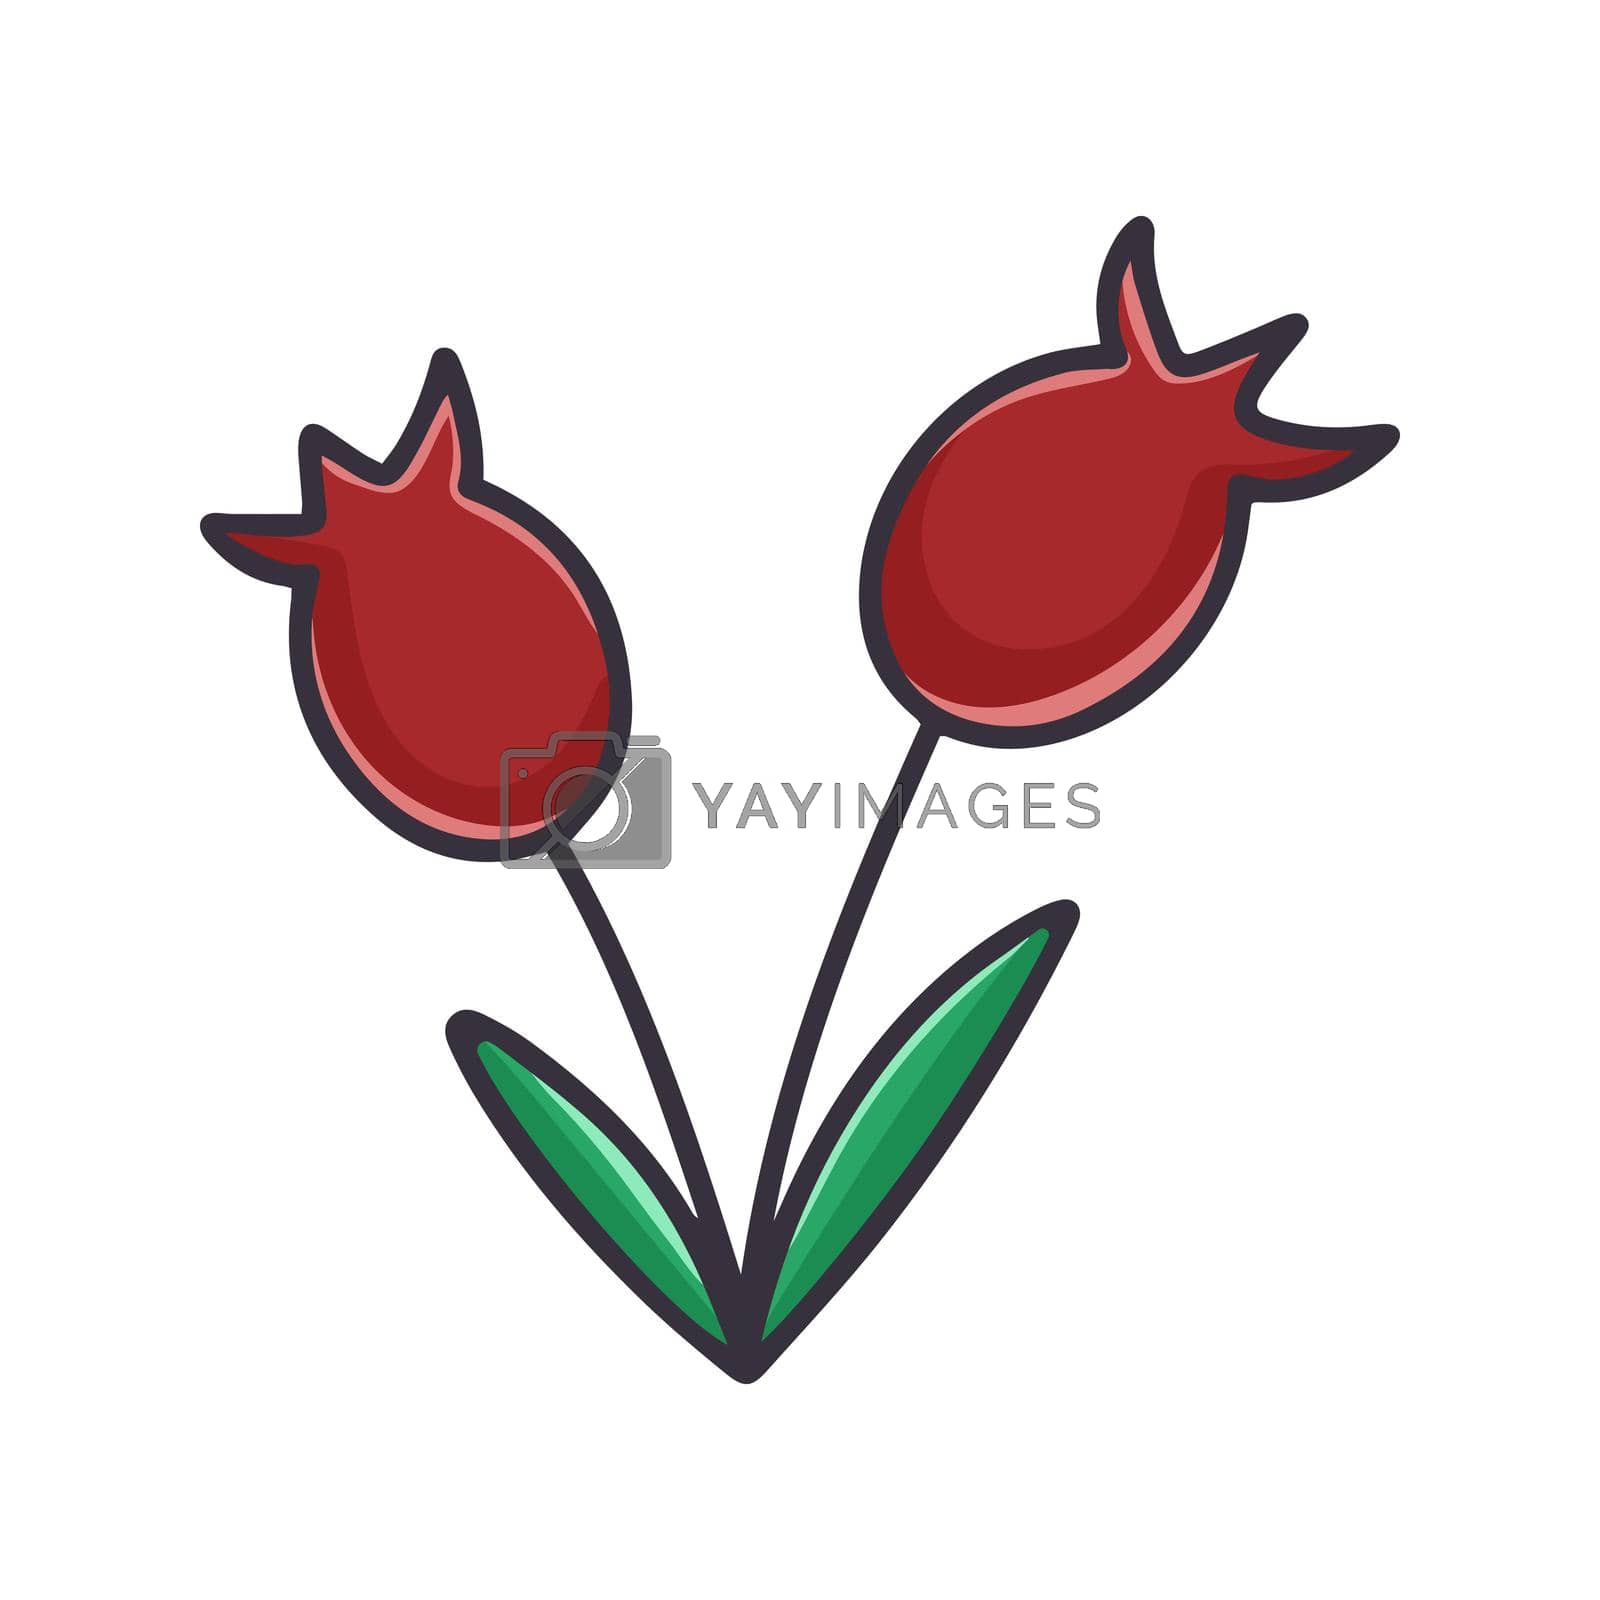 Royalty free image of Simple flower cartoon clipart by TassiaK